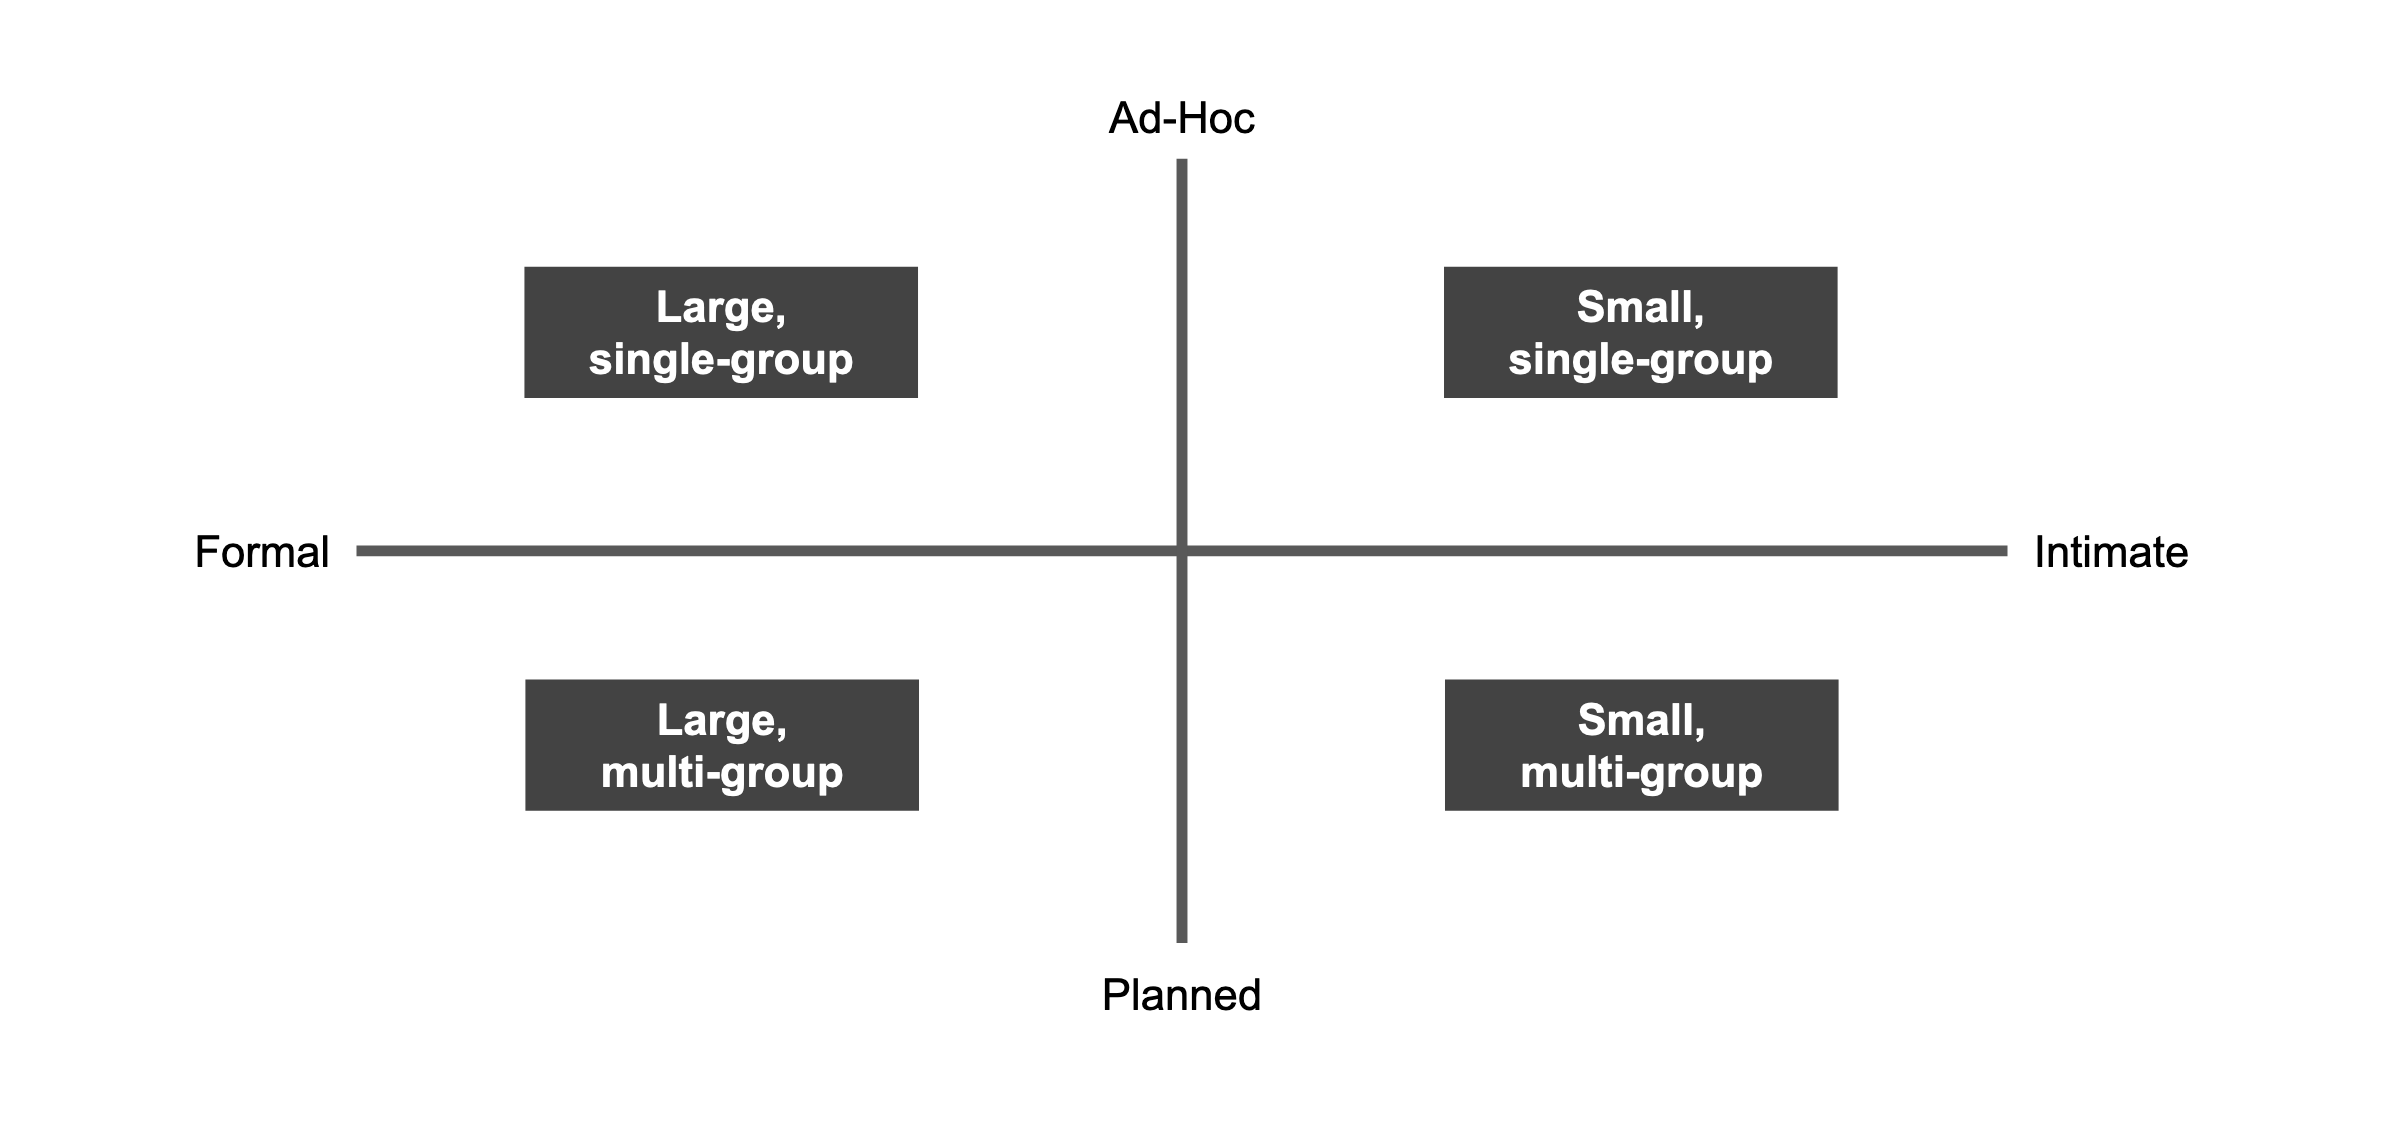 a graph showing a workshop or session based on size and formality